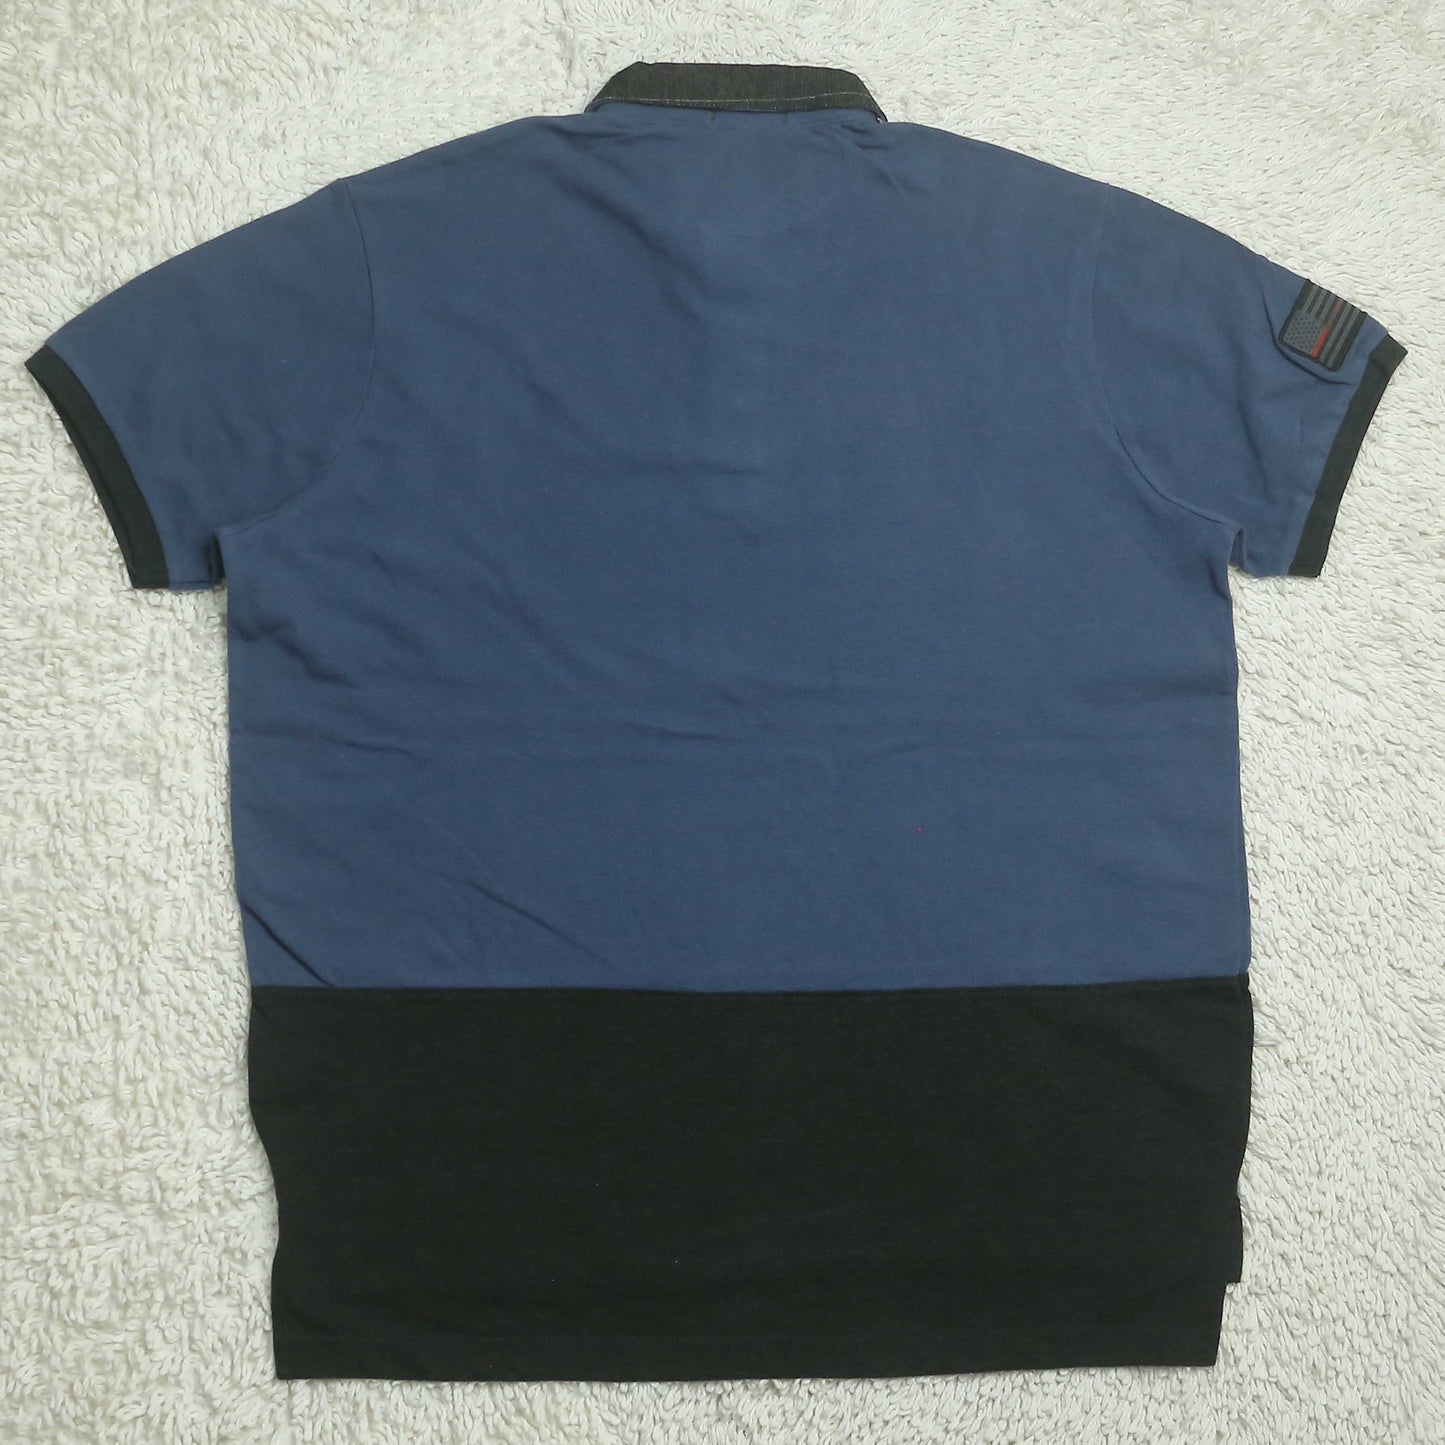 (MINOR FAULT) Uspa - Polo (Men) Blue With Black Bottom & Embroidered Logo - T-Shirt